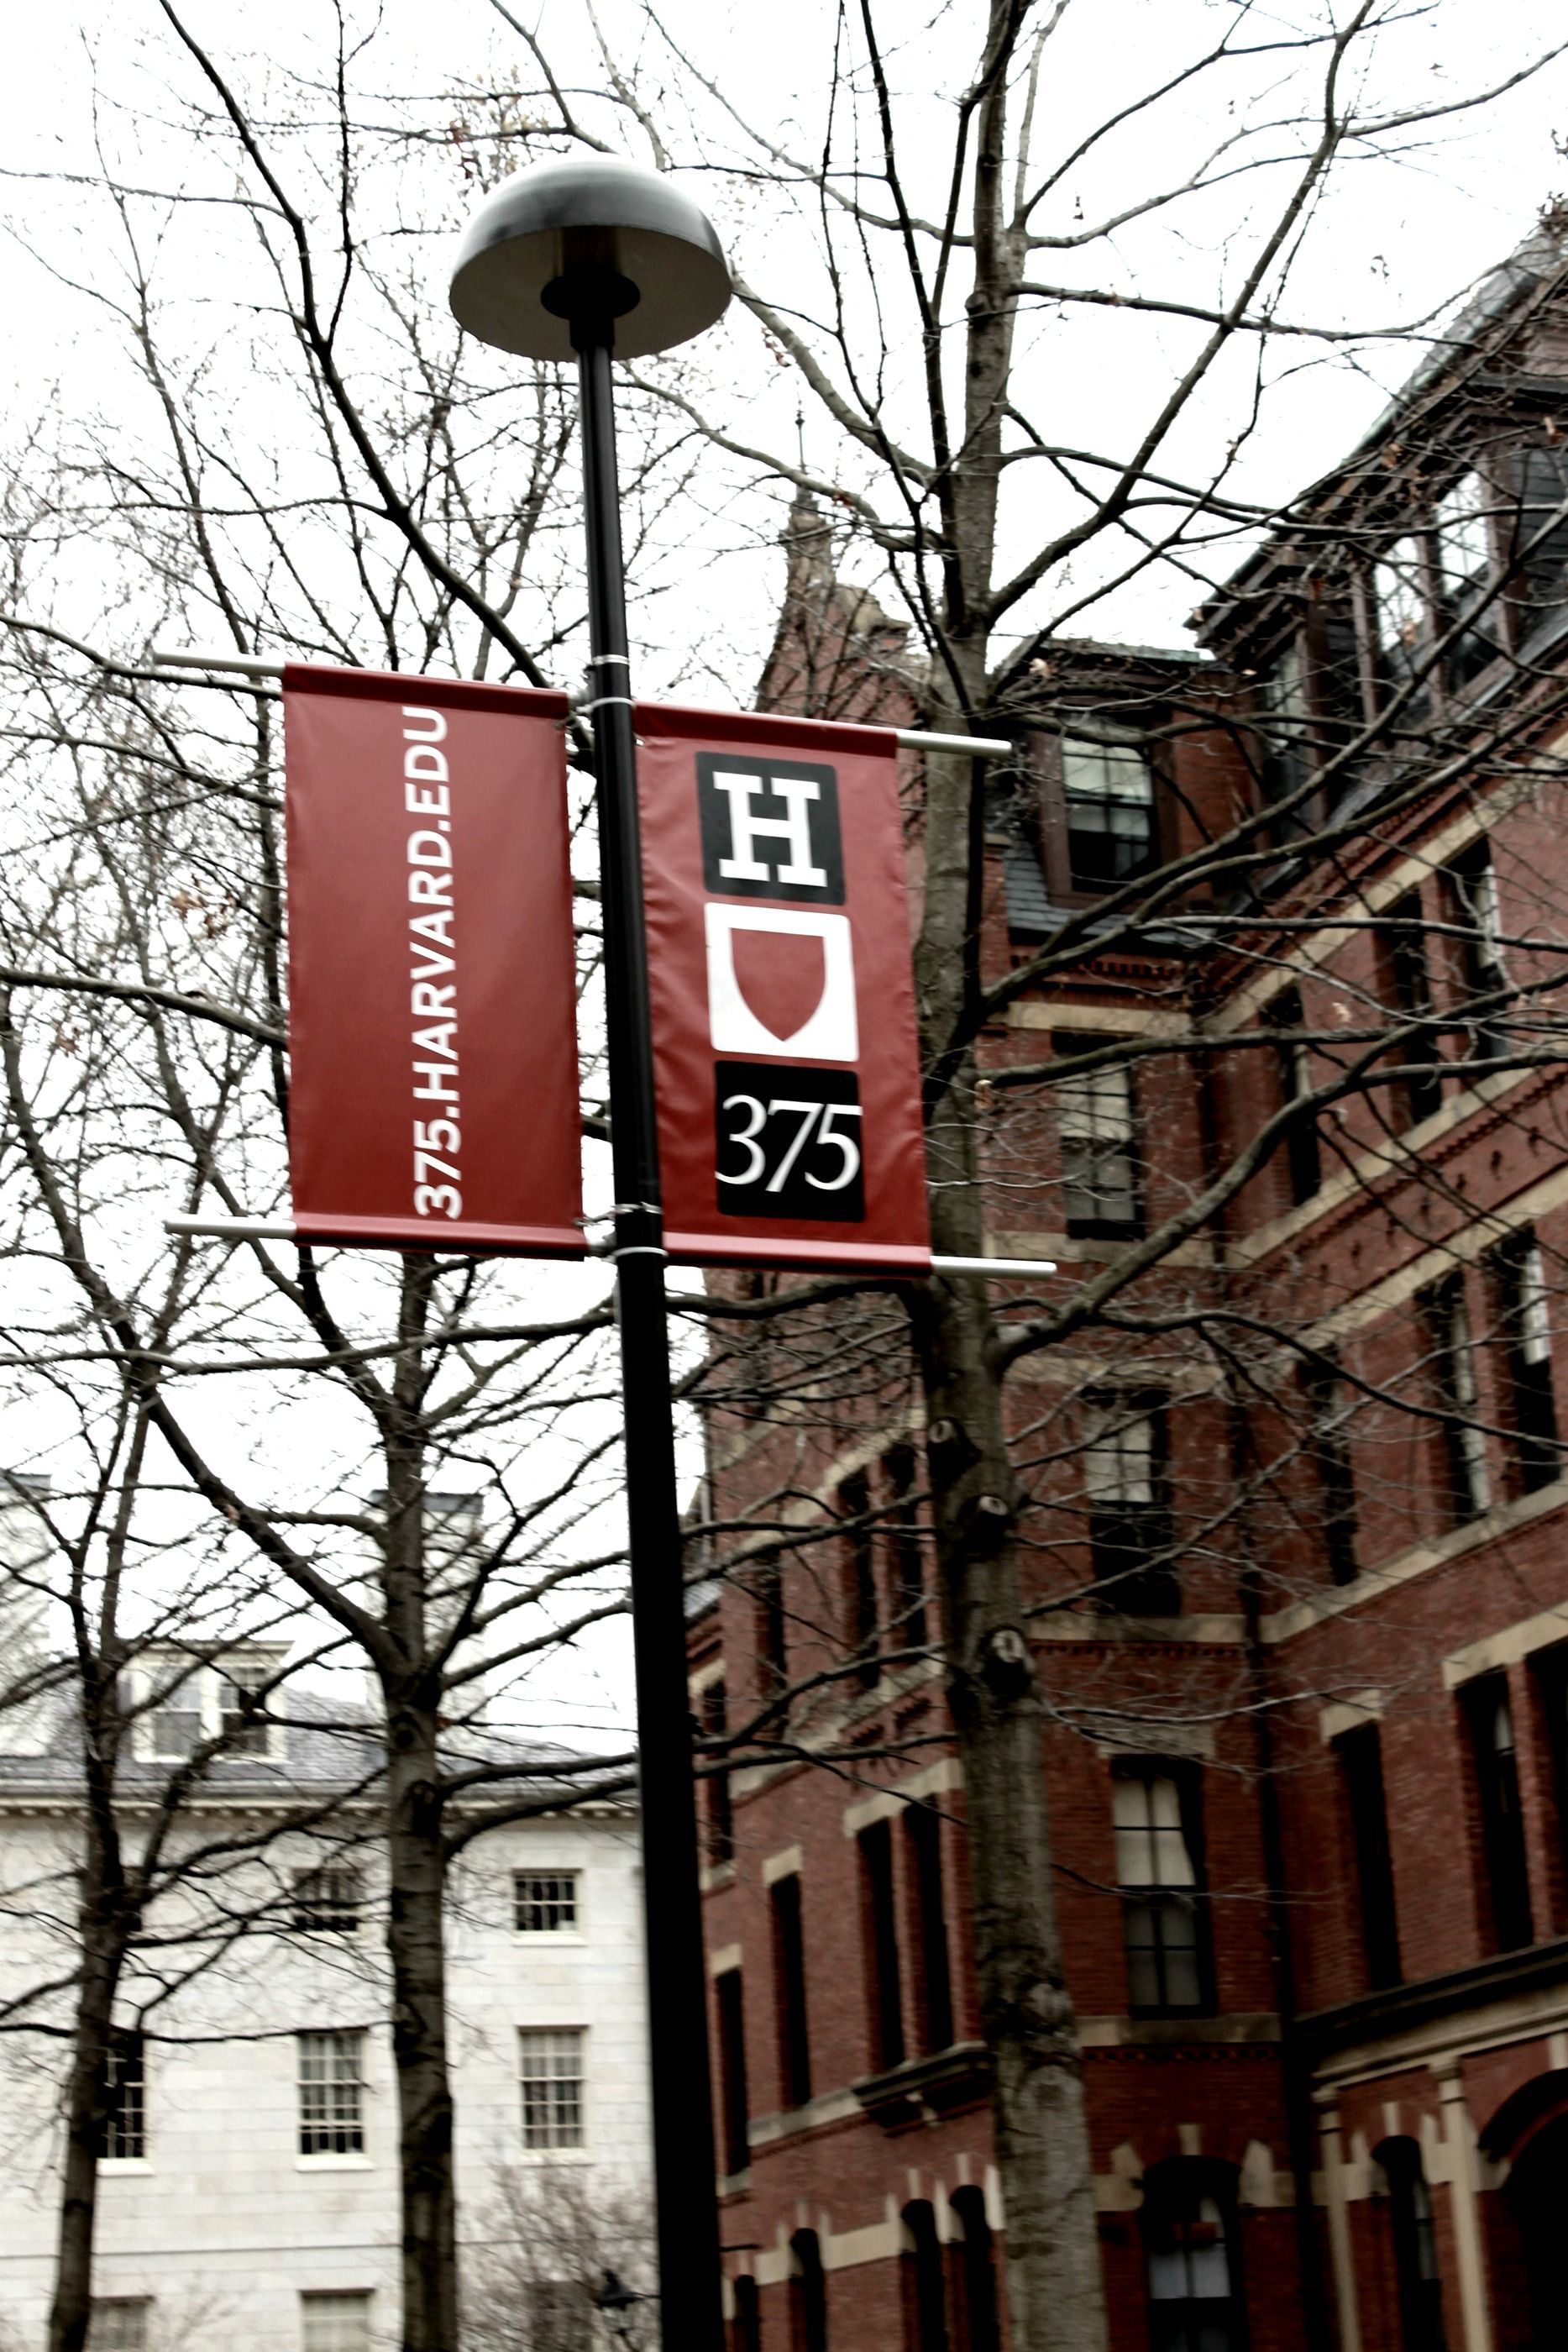 A banner for Harvard University is attached to a street lamp. - Harvard